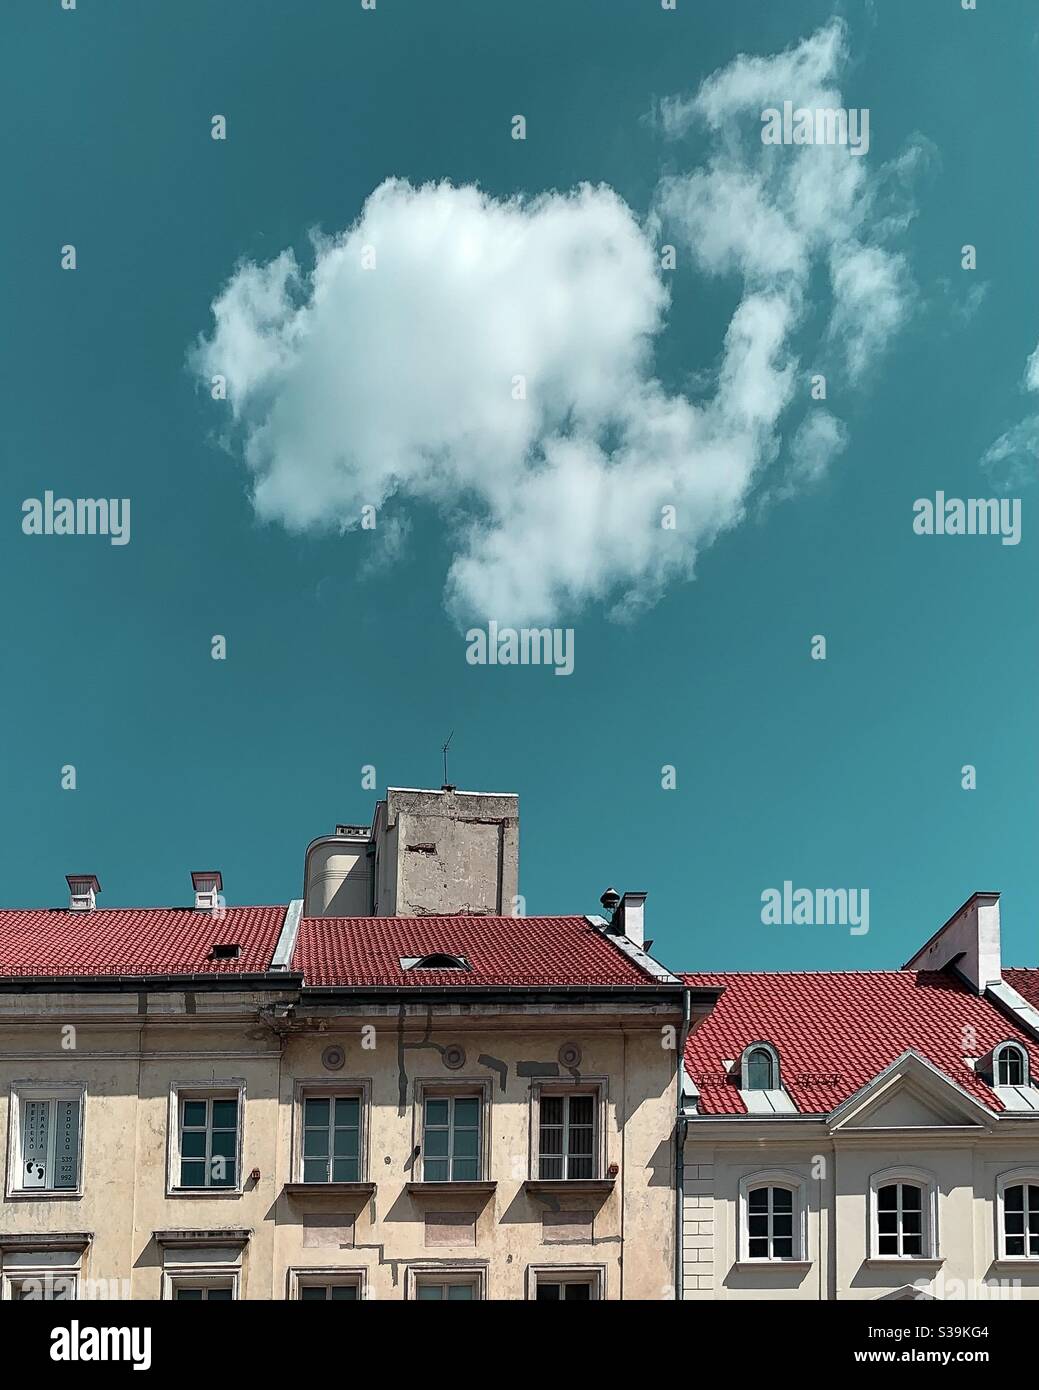 A Cloud over an old town building Stock Photo